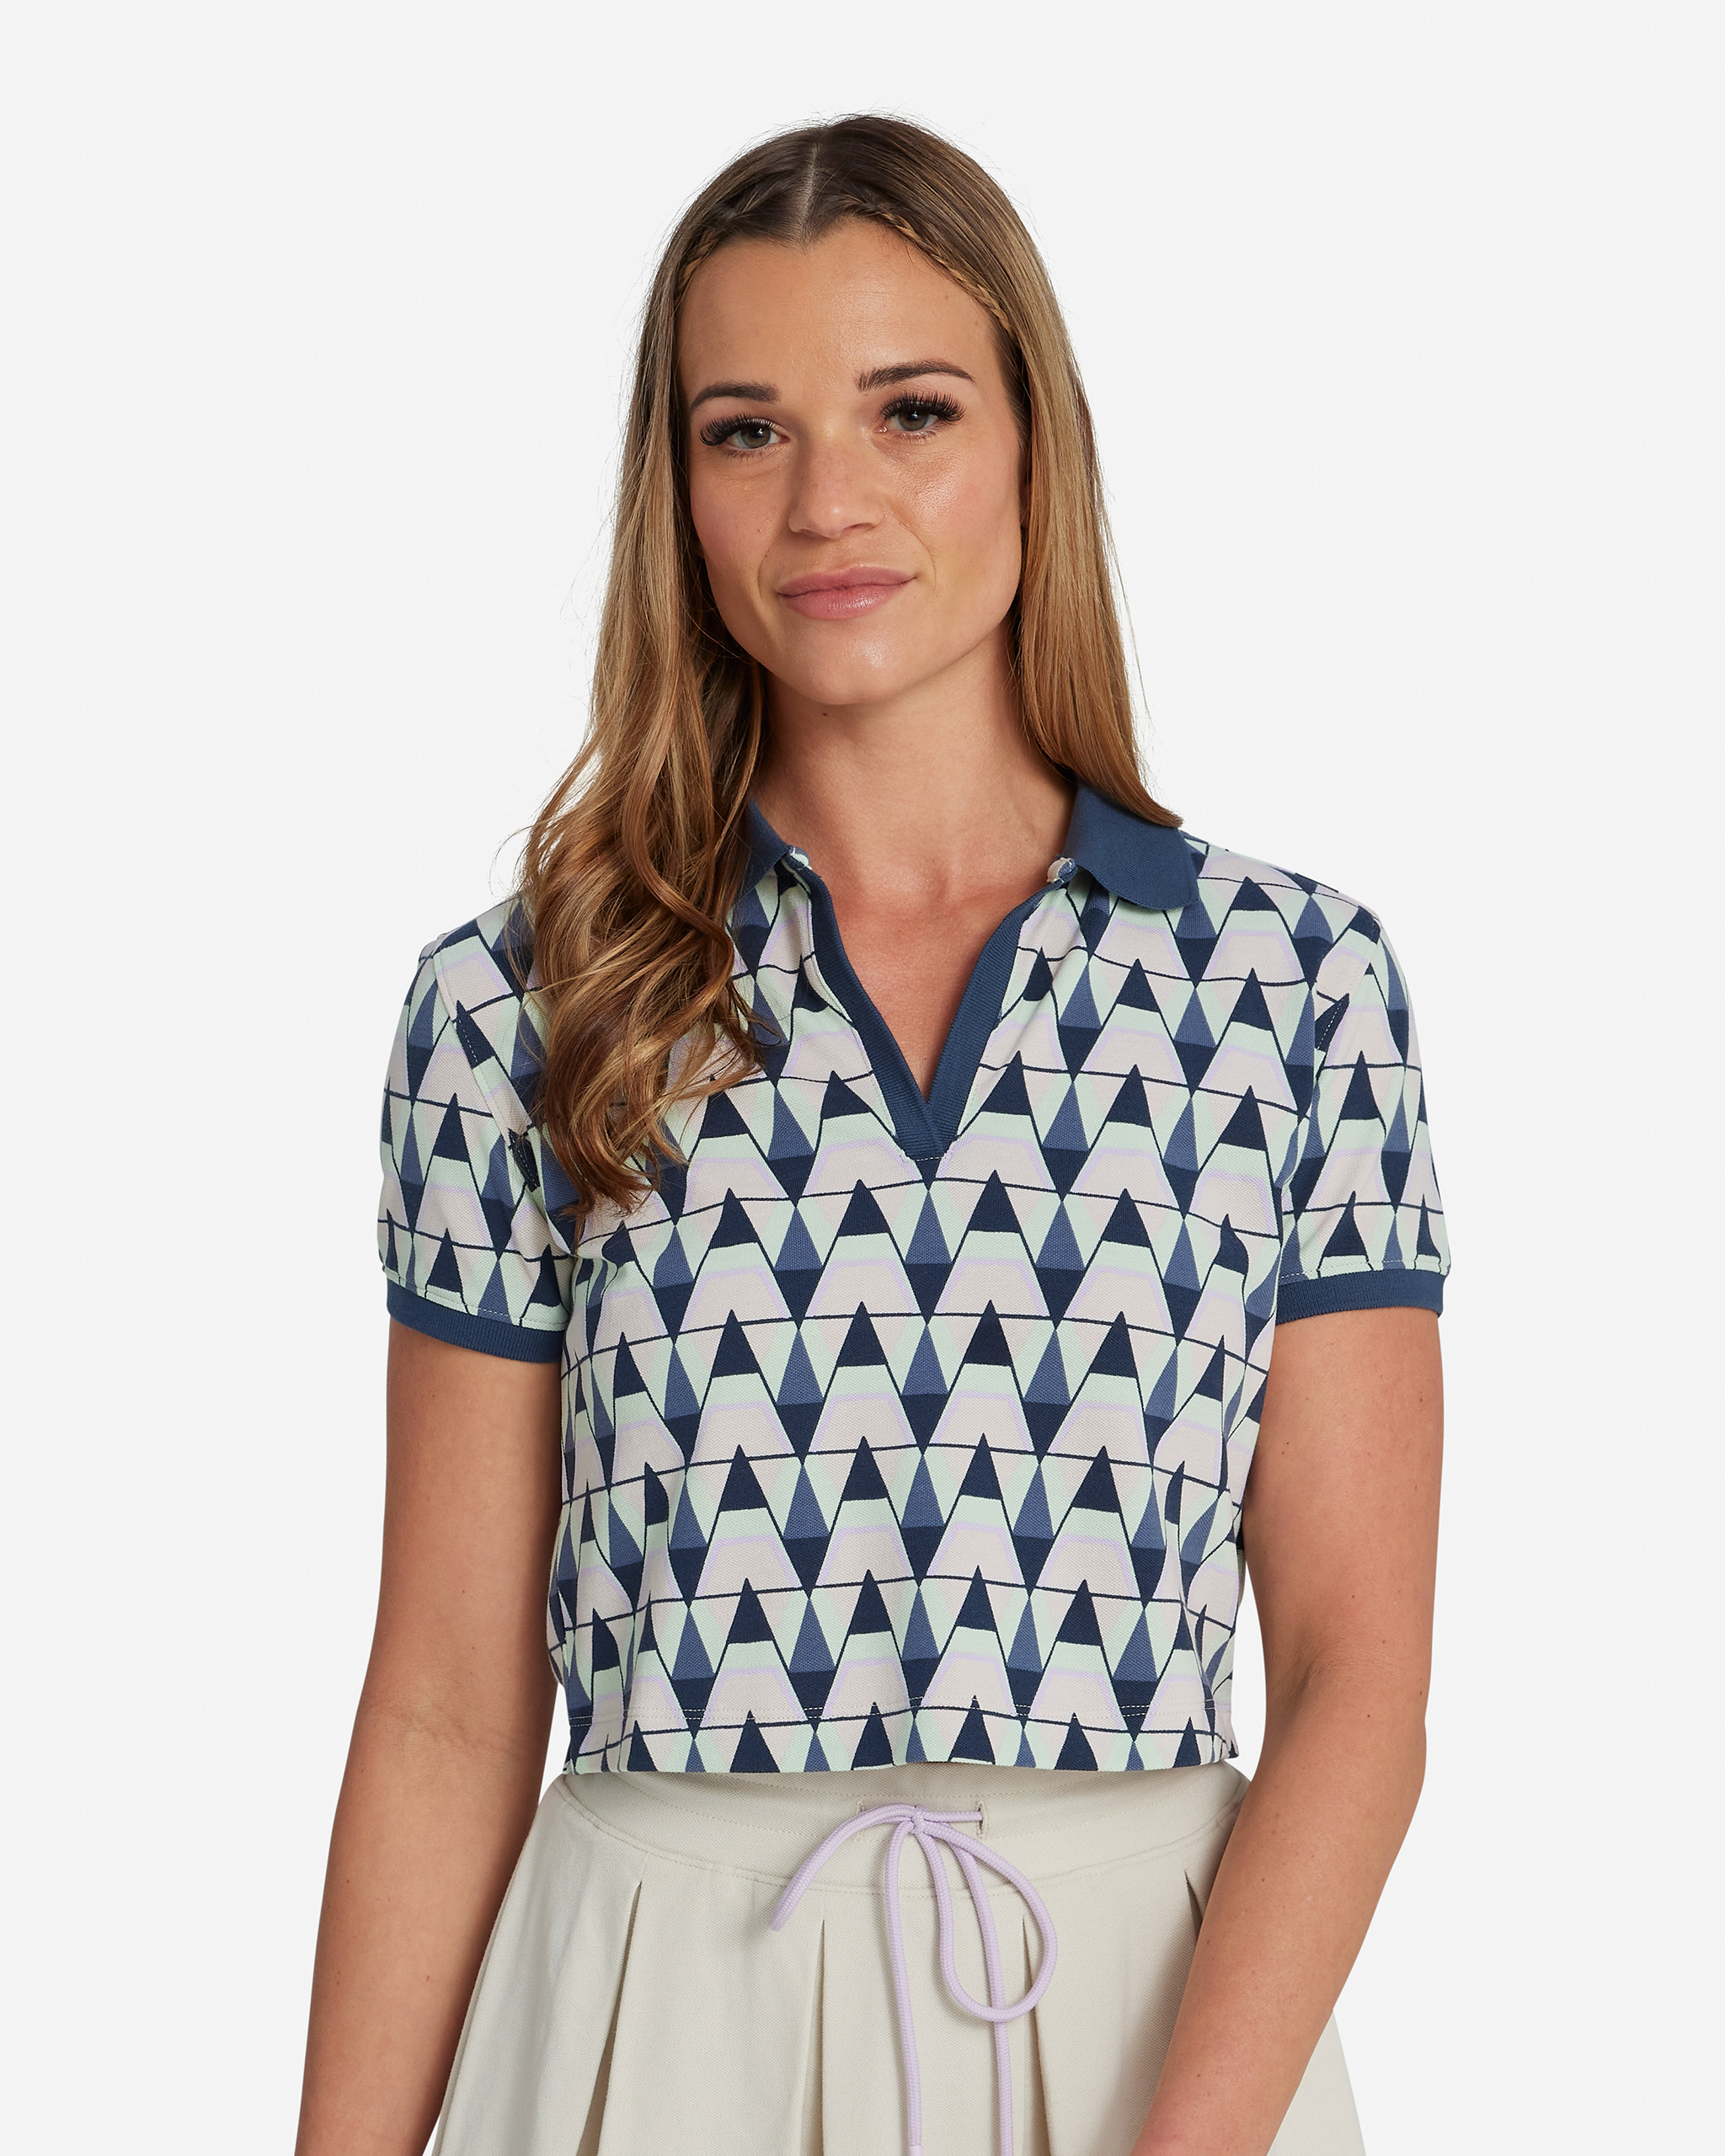 Ultimate Guide to Best Women's Golf Apparel – Birdies and Bows